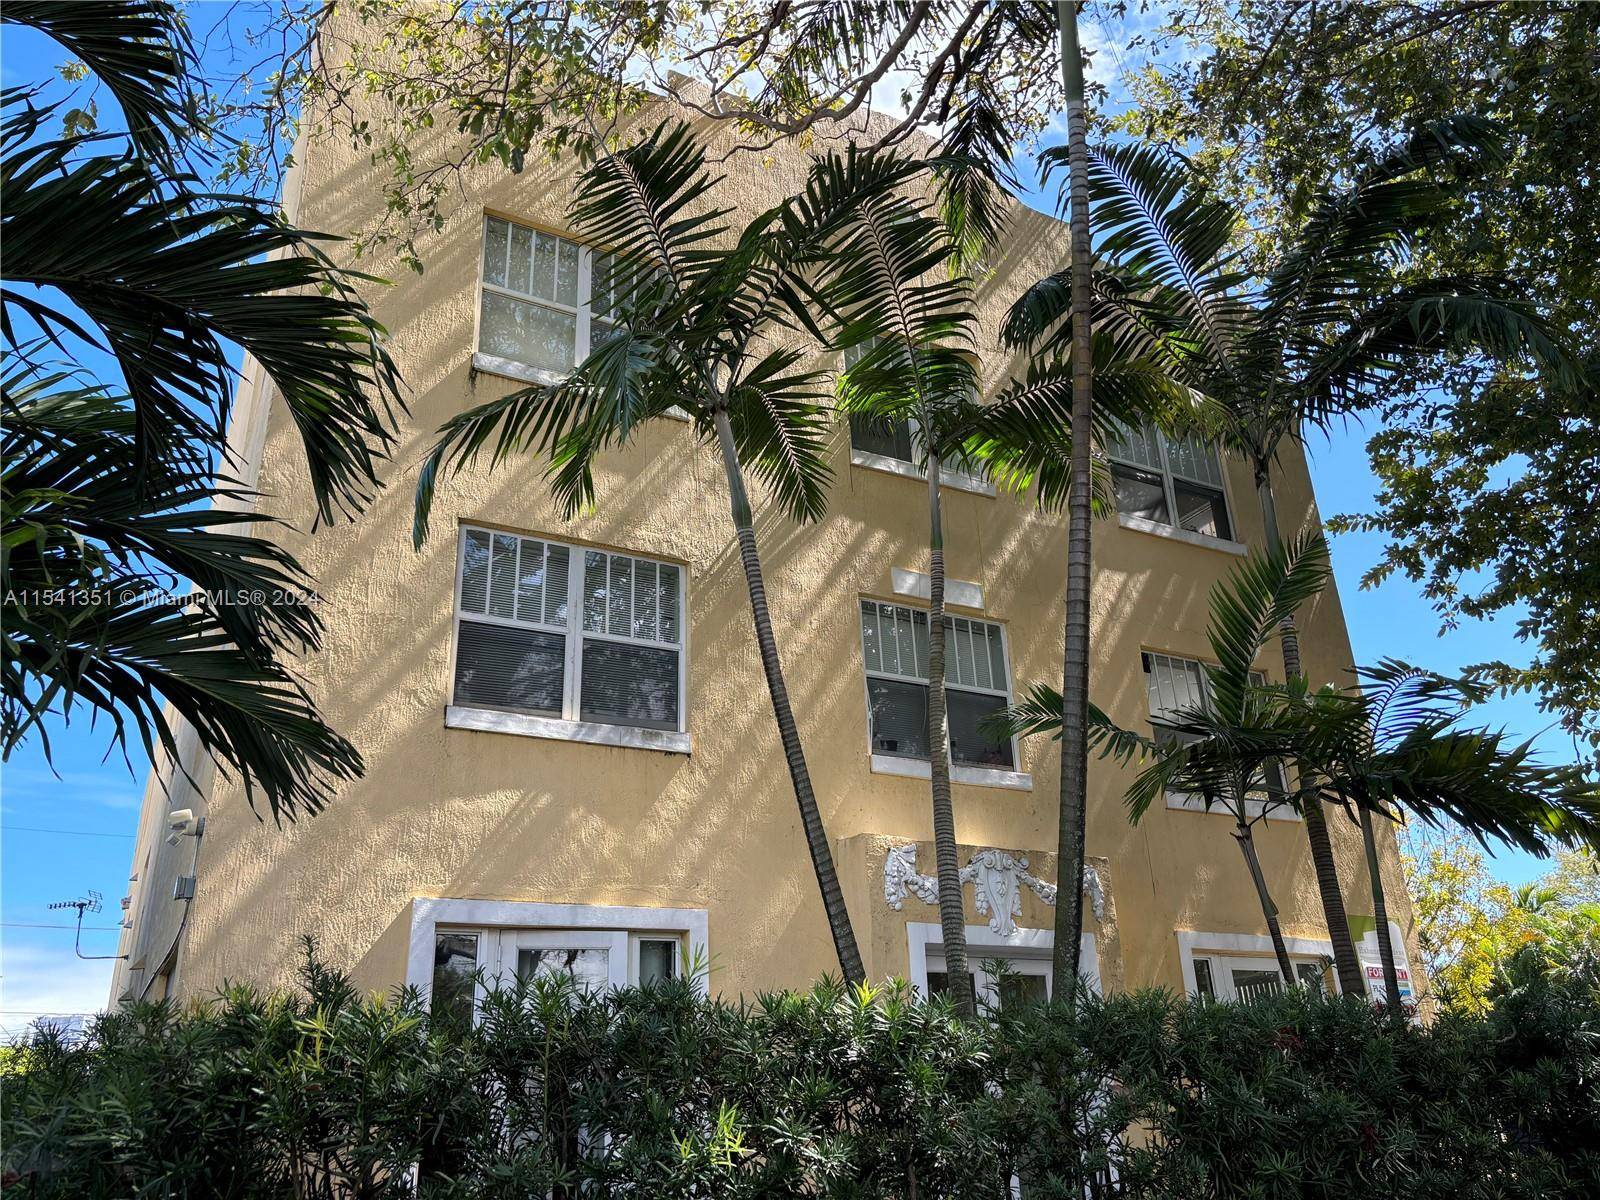 The Porosoff Group is pleased to offer for sale 843 SW 13th Ave.